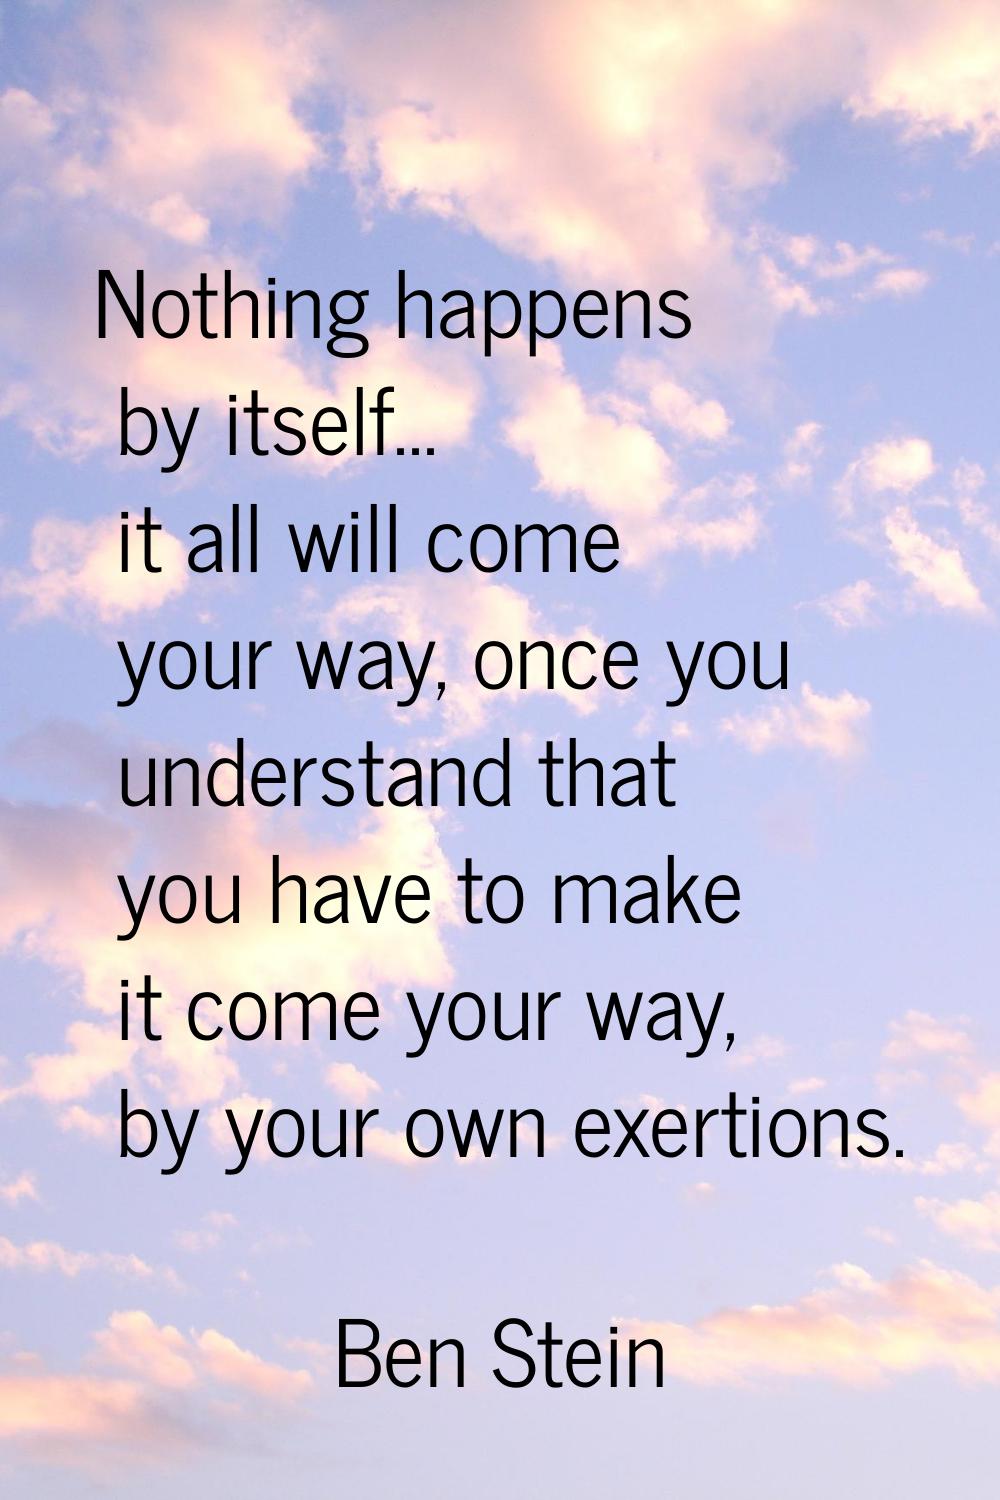 Nothing happens by itself... it all will come your way, once you understand that you have to make i